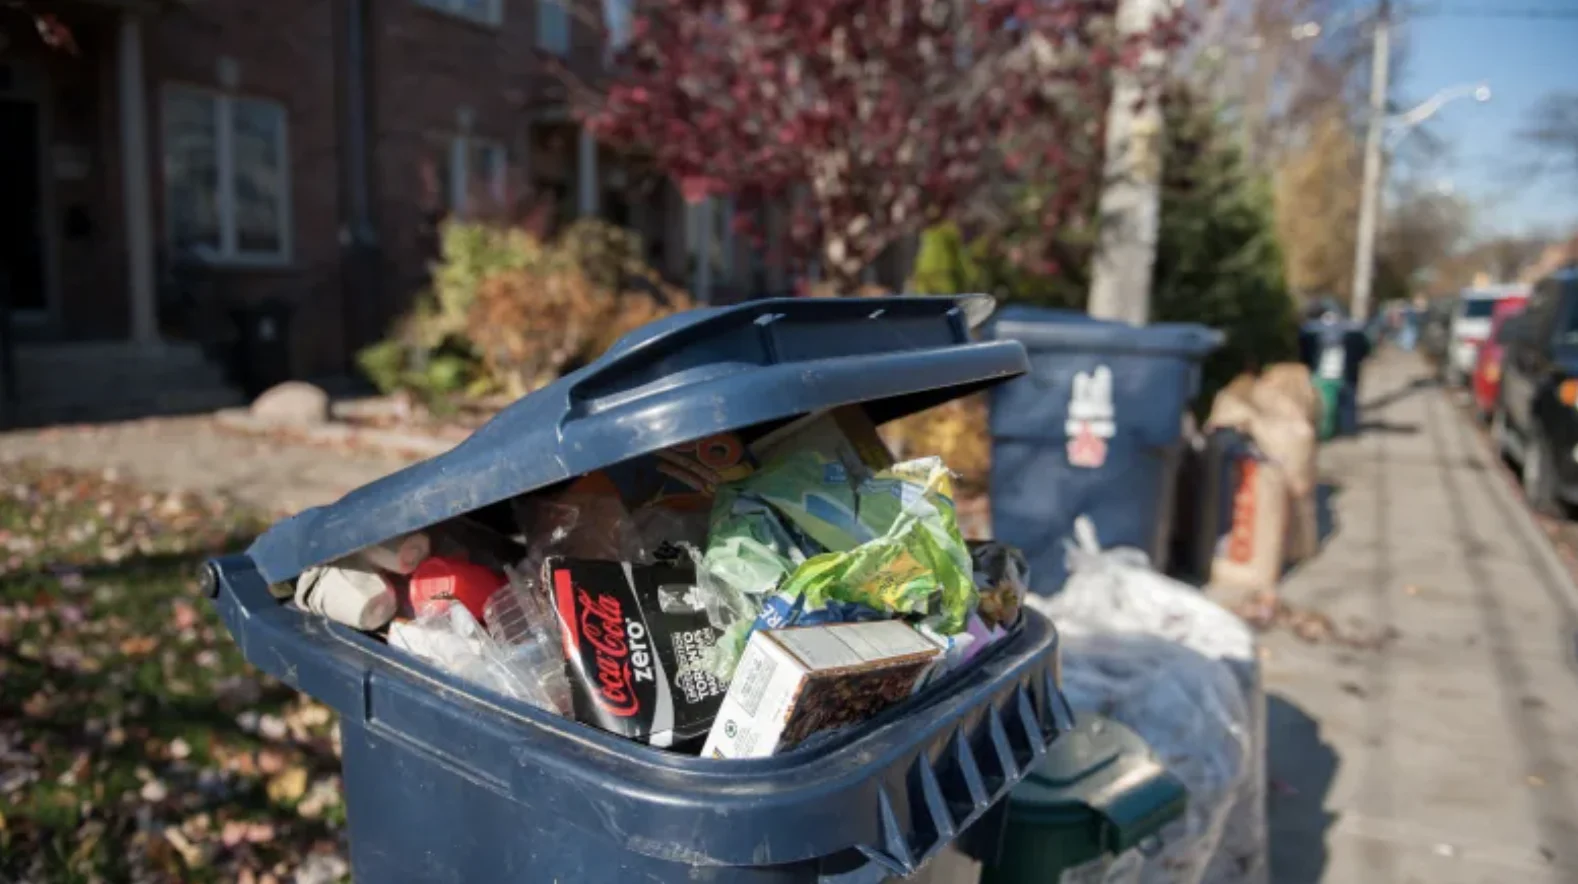 CBC: A recycling bin in Toronto. The Ontario government plan to adjust regulations for advanced recycling facilities worries environmentalists. (David Donnelly/CBC)